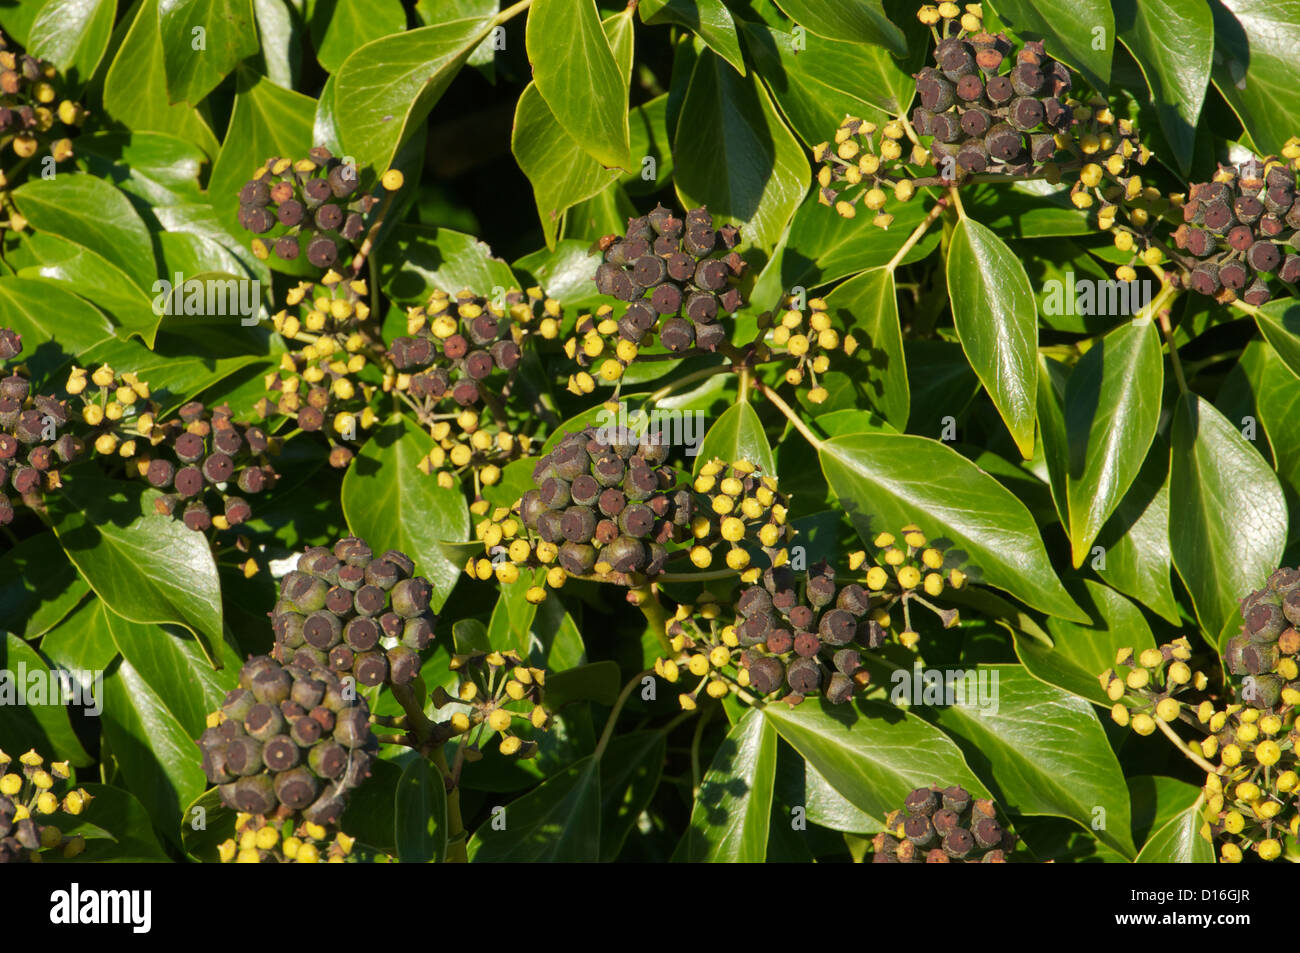 Ivy plant with fruit in various stages of development Stock Photo